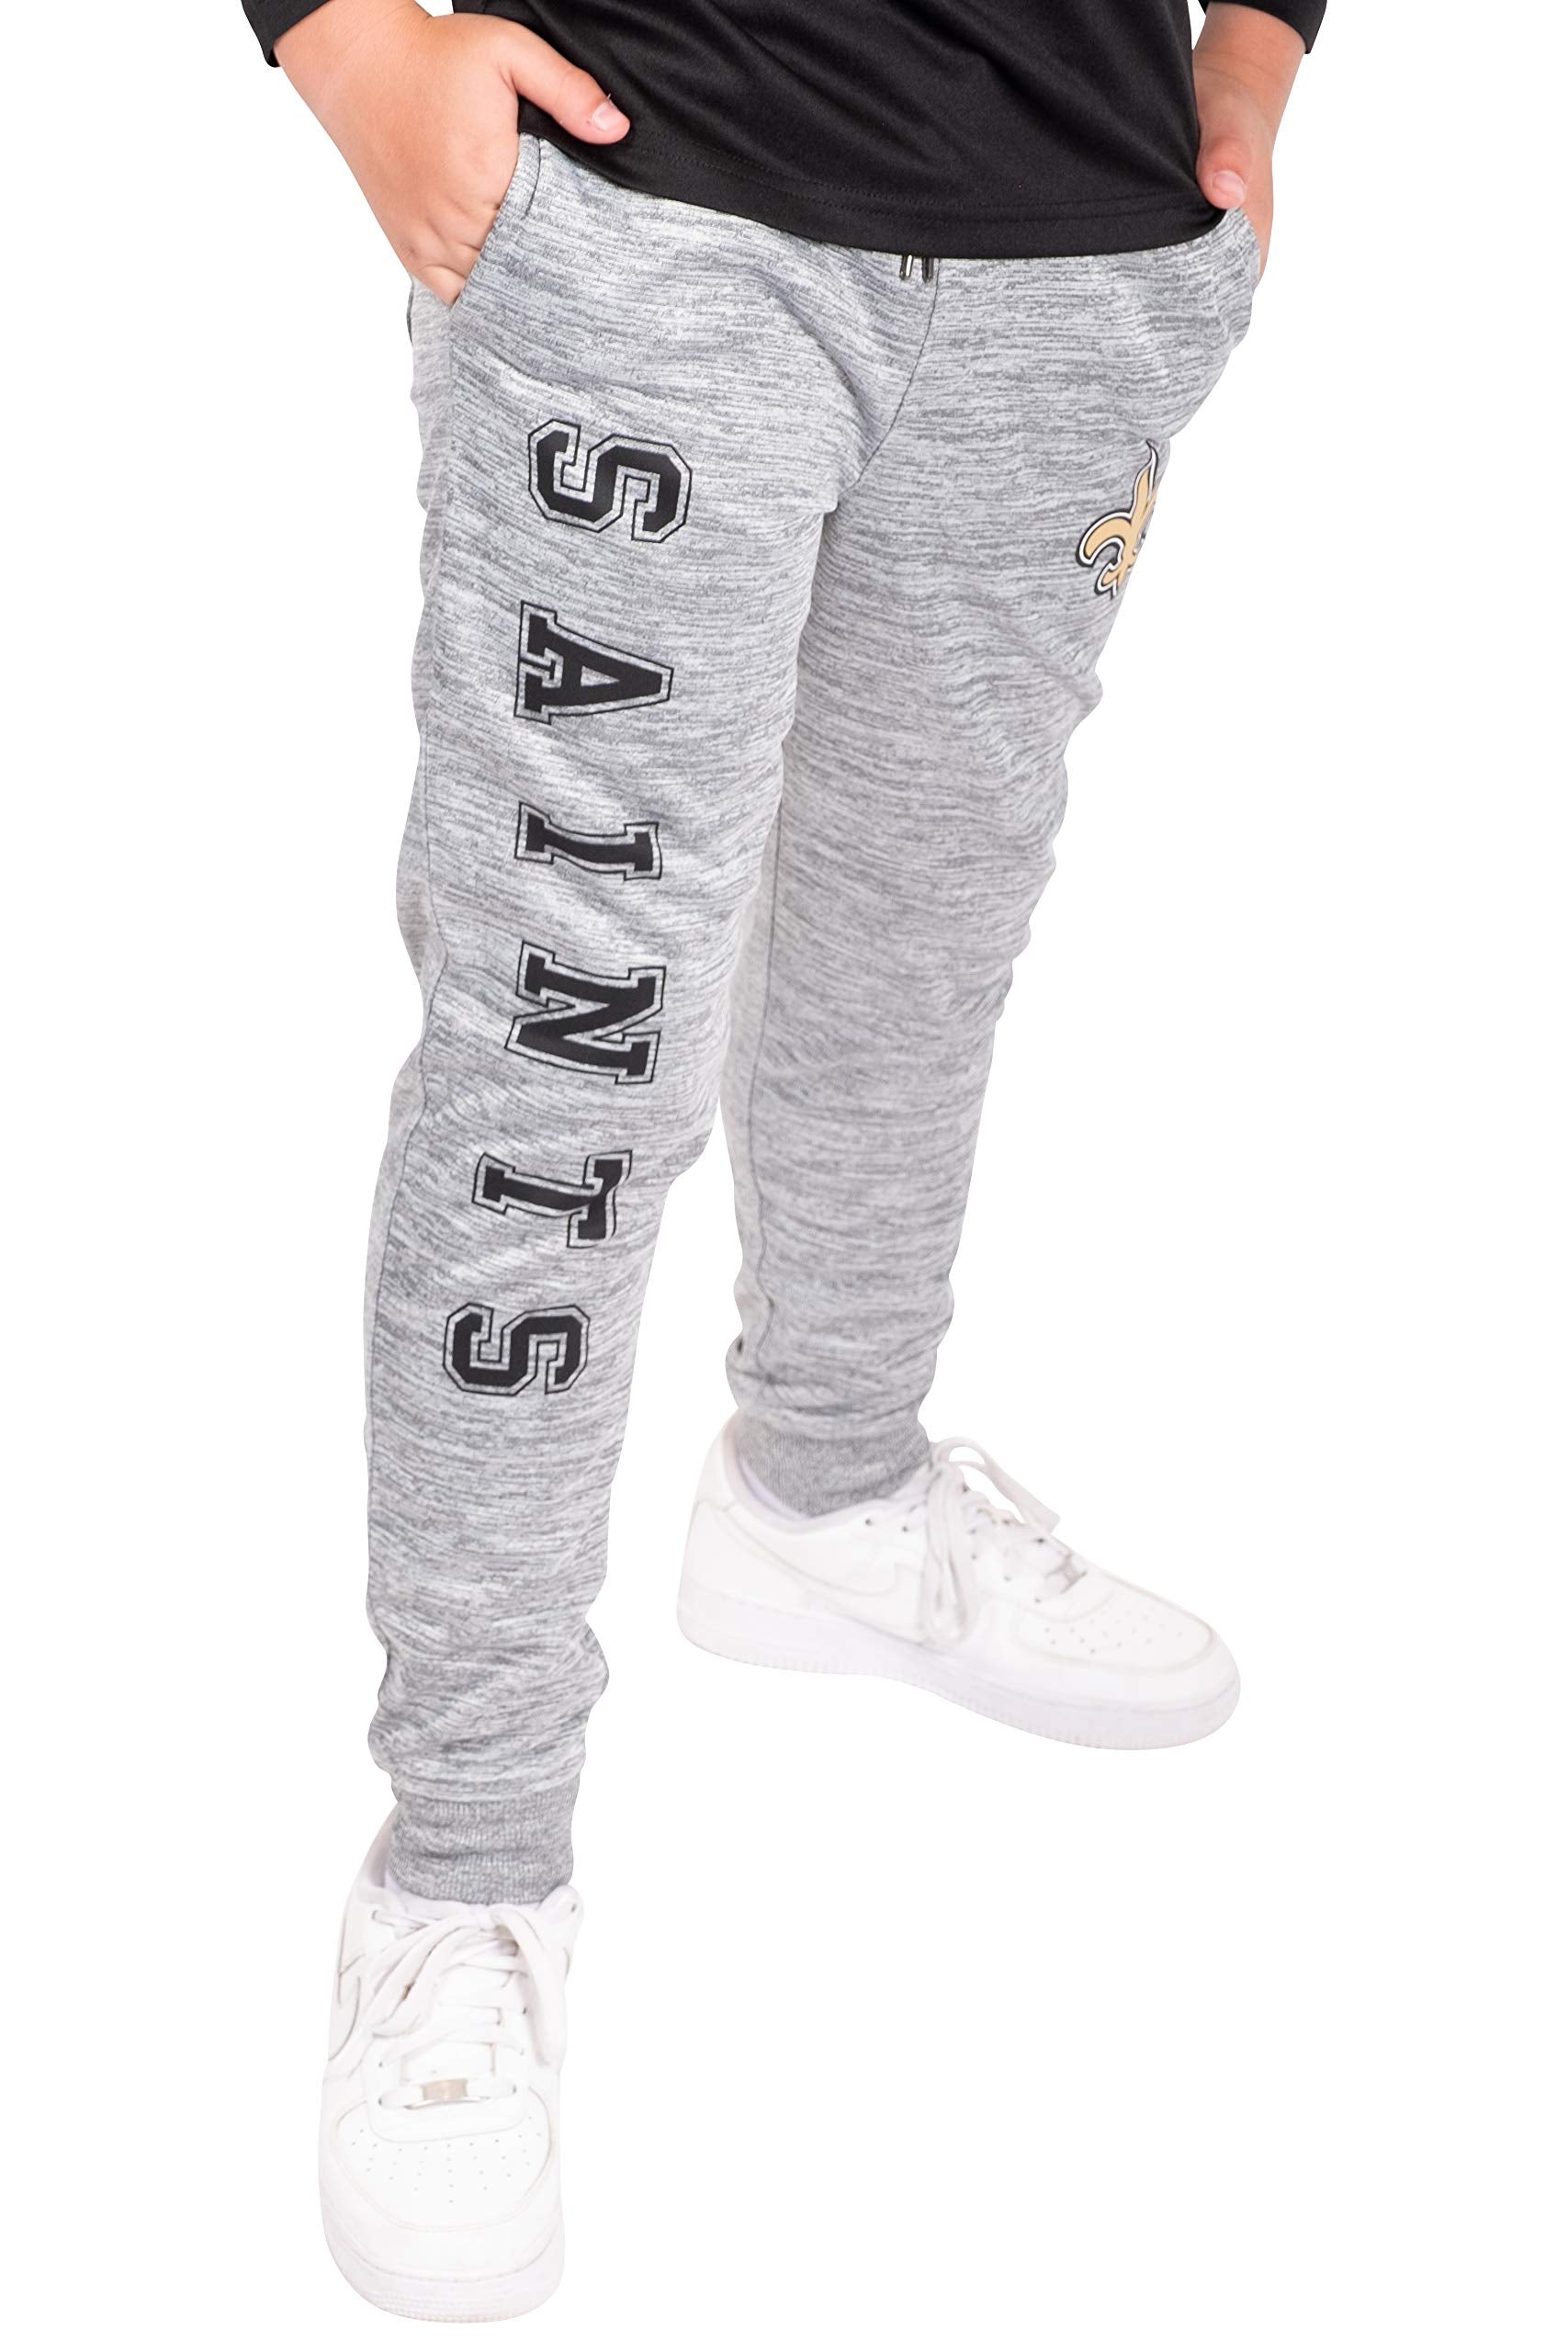 Ultra Game NFL New Orleans Saints Youth High Performance Moisture Wicking Fleece Jogger Sweatpants|New Orleans Saints